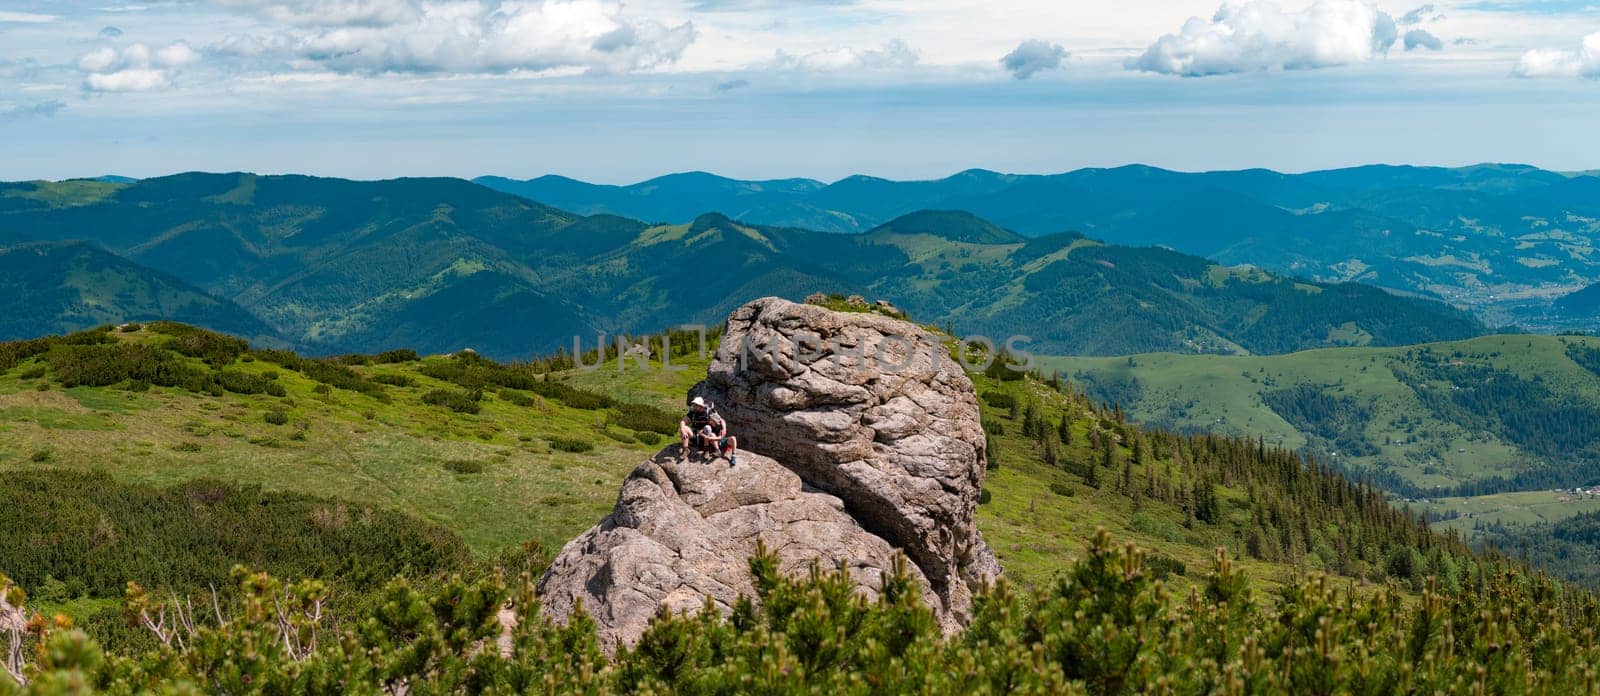 Dad and son are sitting on a big stone in the mountains, Vukhati Kamin mountain in the Carpathians of Ukraine, active recreation in the mountains in summer.